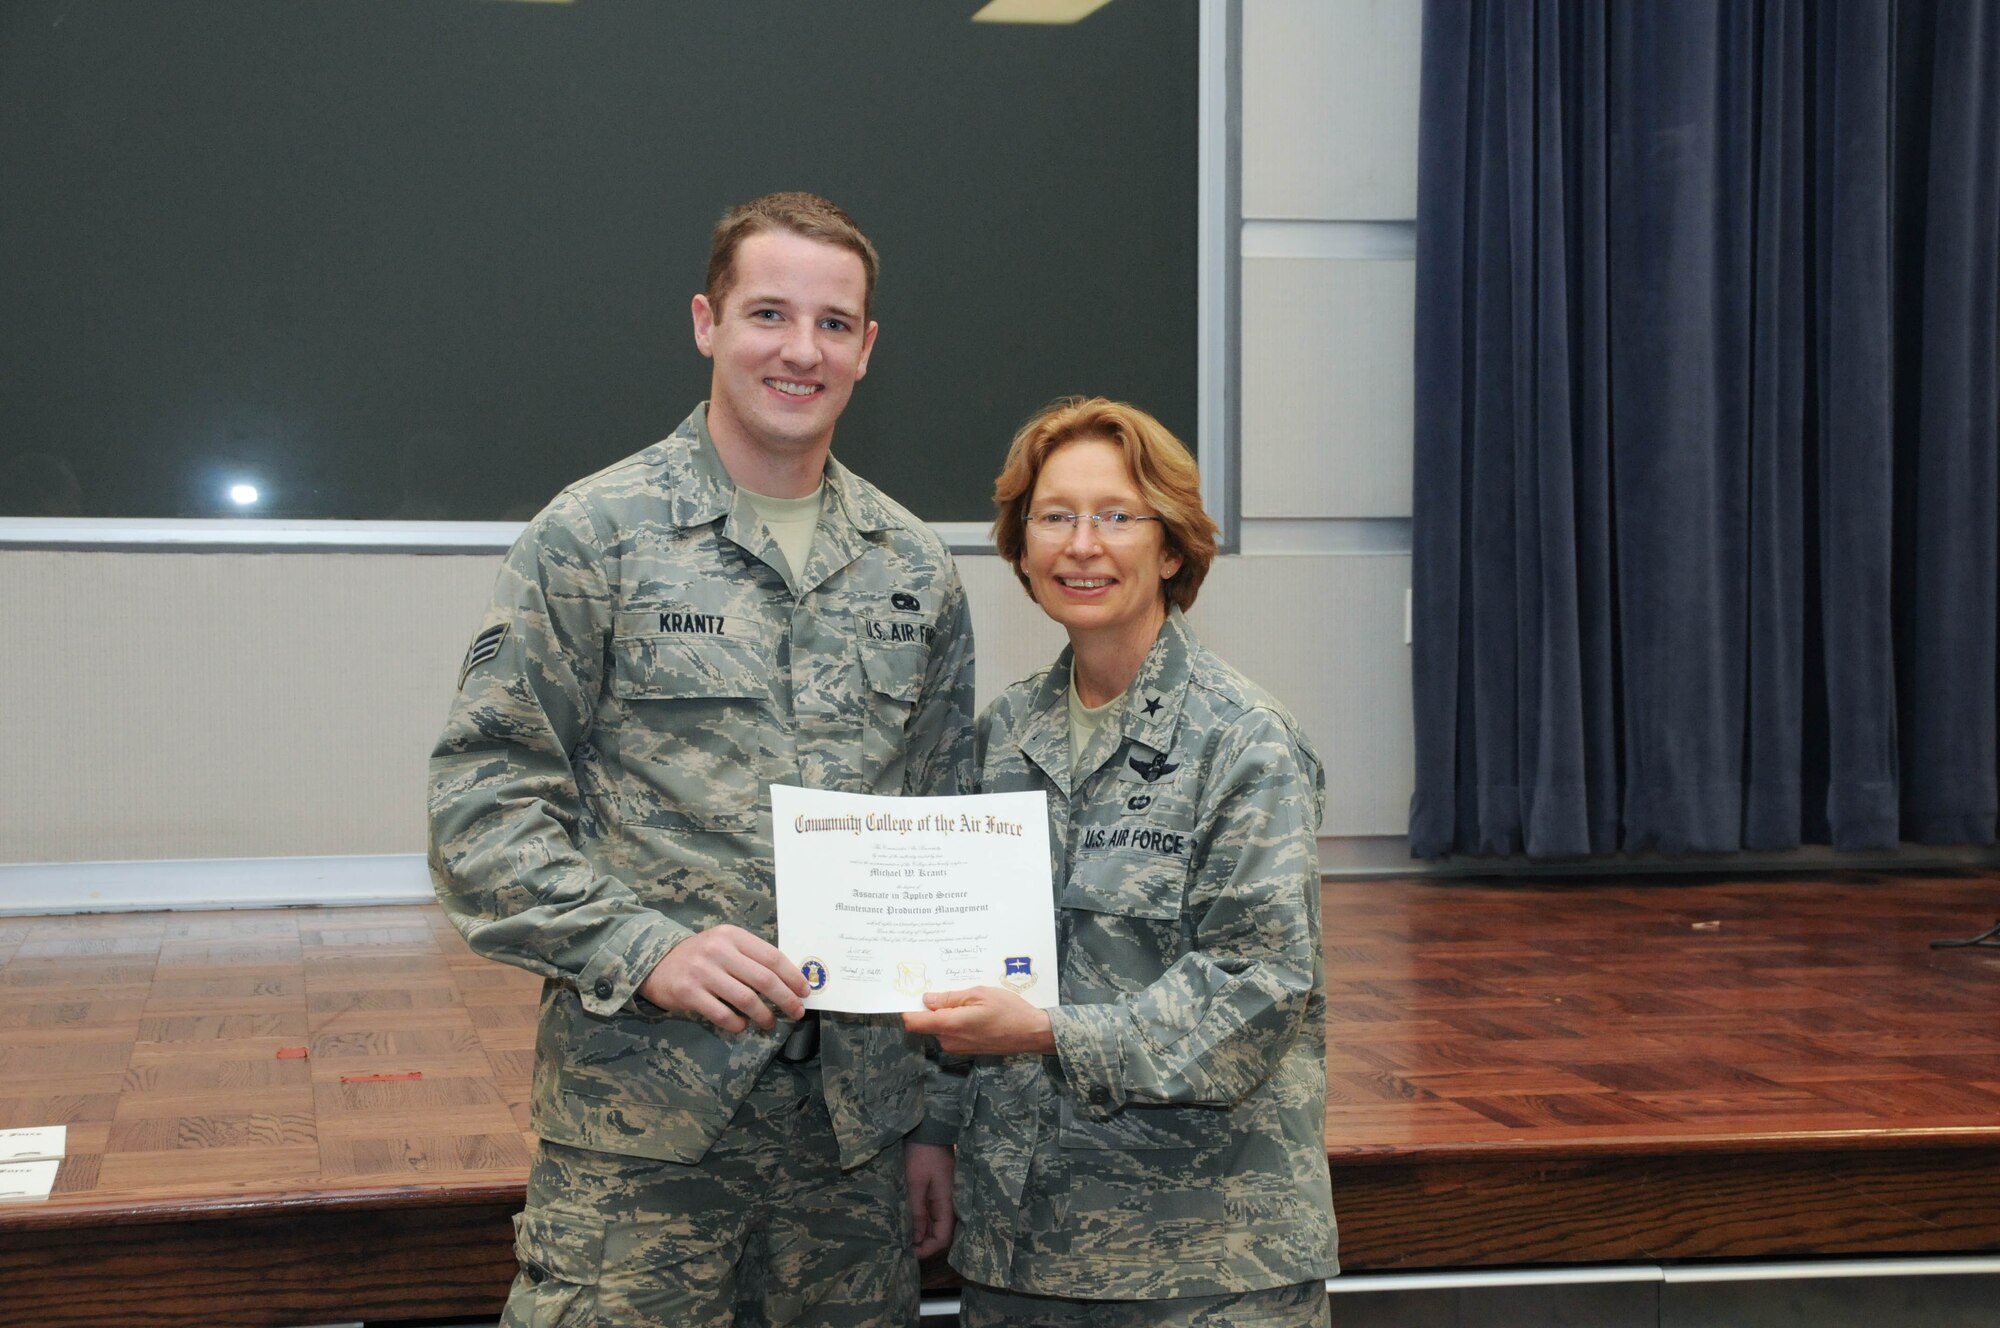 U.S. Air Force Senior Airman Michael Krantz, left, a member of the 166th Maintenance Operations Flight, 166th Airlift Wing, receives a certificate from Brig. Gen. Carol Timmons, assistant adjutant general for air, Delaware National Guard to recognize Krantz’s attainment of a Community College of the Air Force associate of applied science degree in maintenance production management at a CCAF Class of October 2013 graduation ceremony held Nov. 3, 2013 at the New Castle Air National Guard Base, Del. (U.S. Air National Guard photo by Tech. Sgt. Robin Meredith)